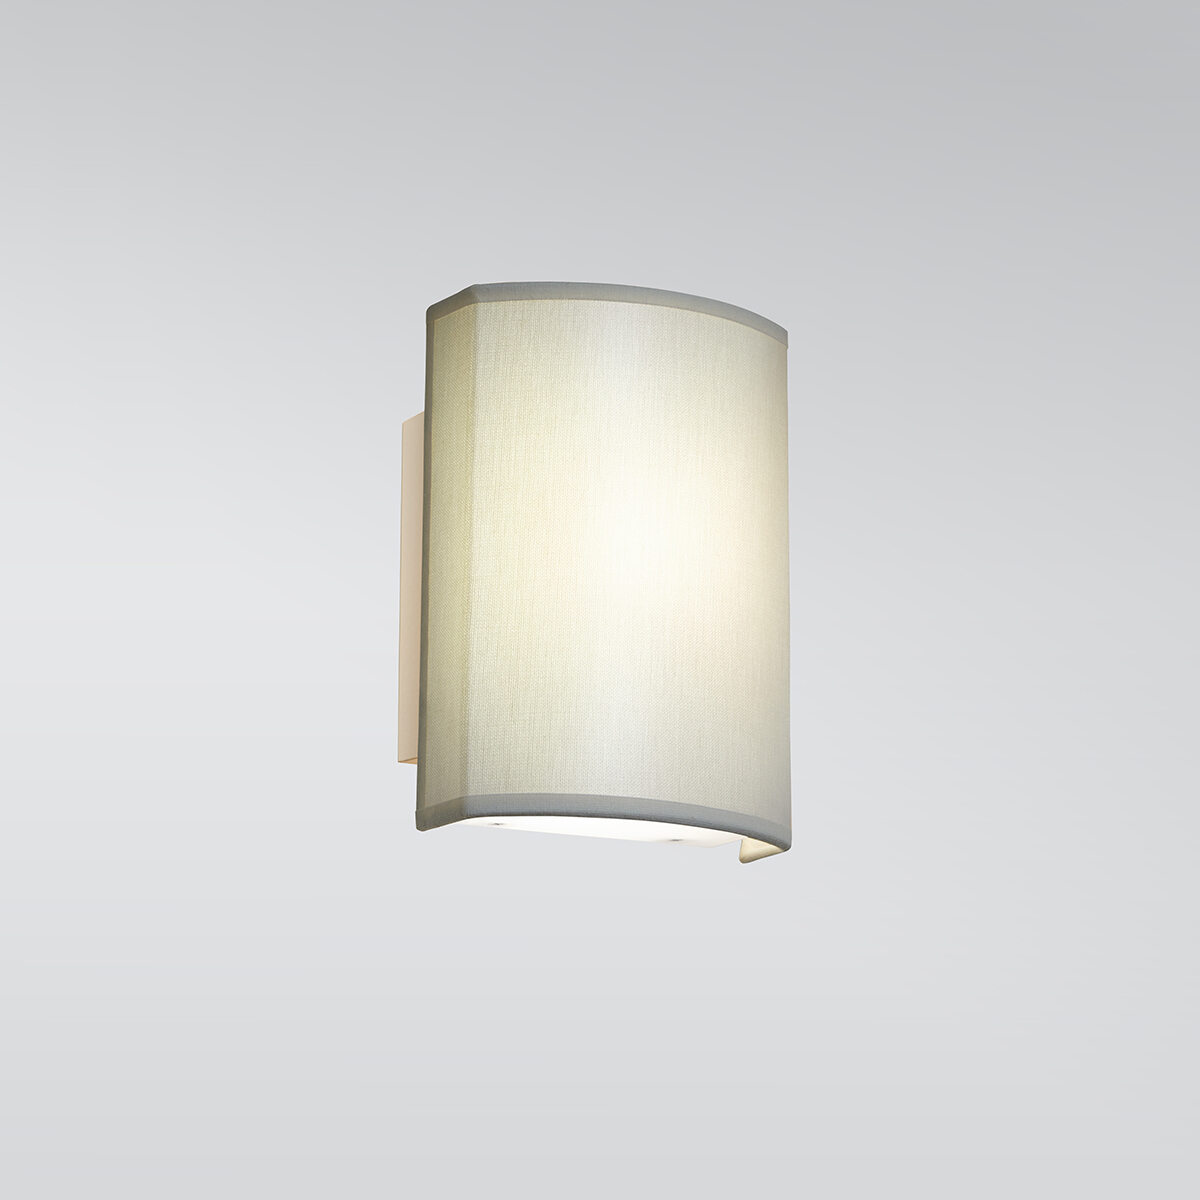 A small rectangular wall sconce with a fabric-looking shade